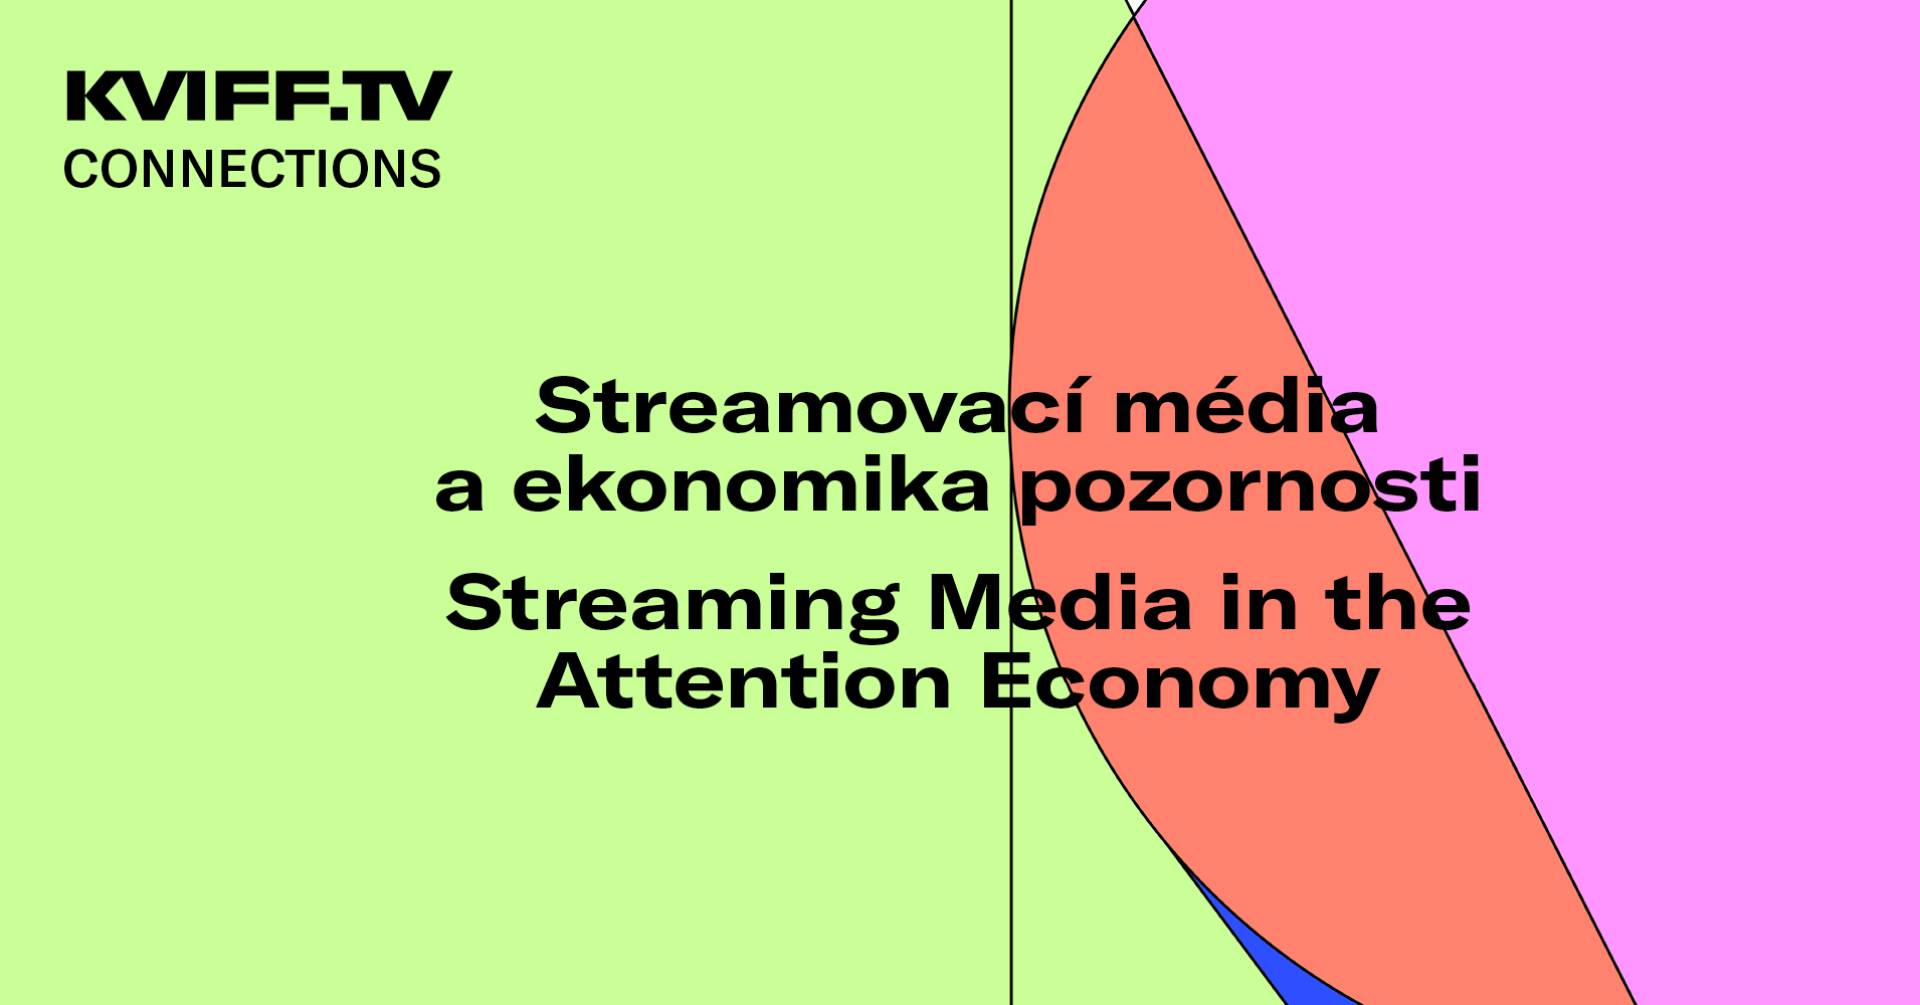 Streaming Media in the Attention Economy